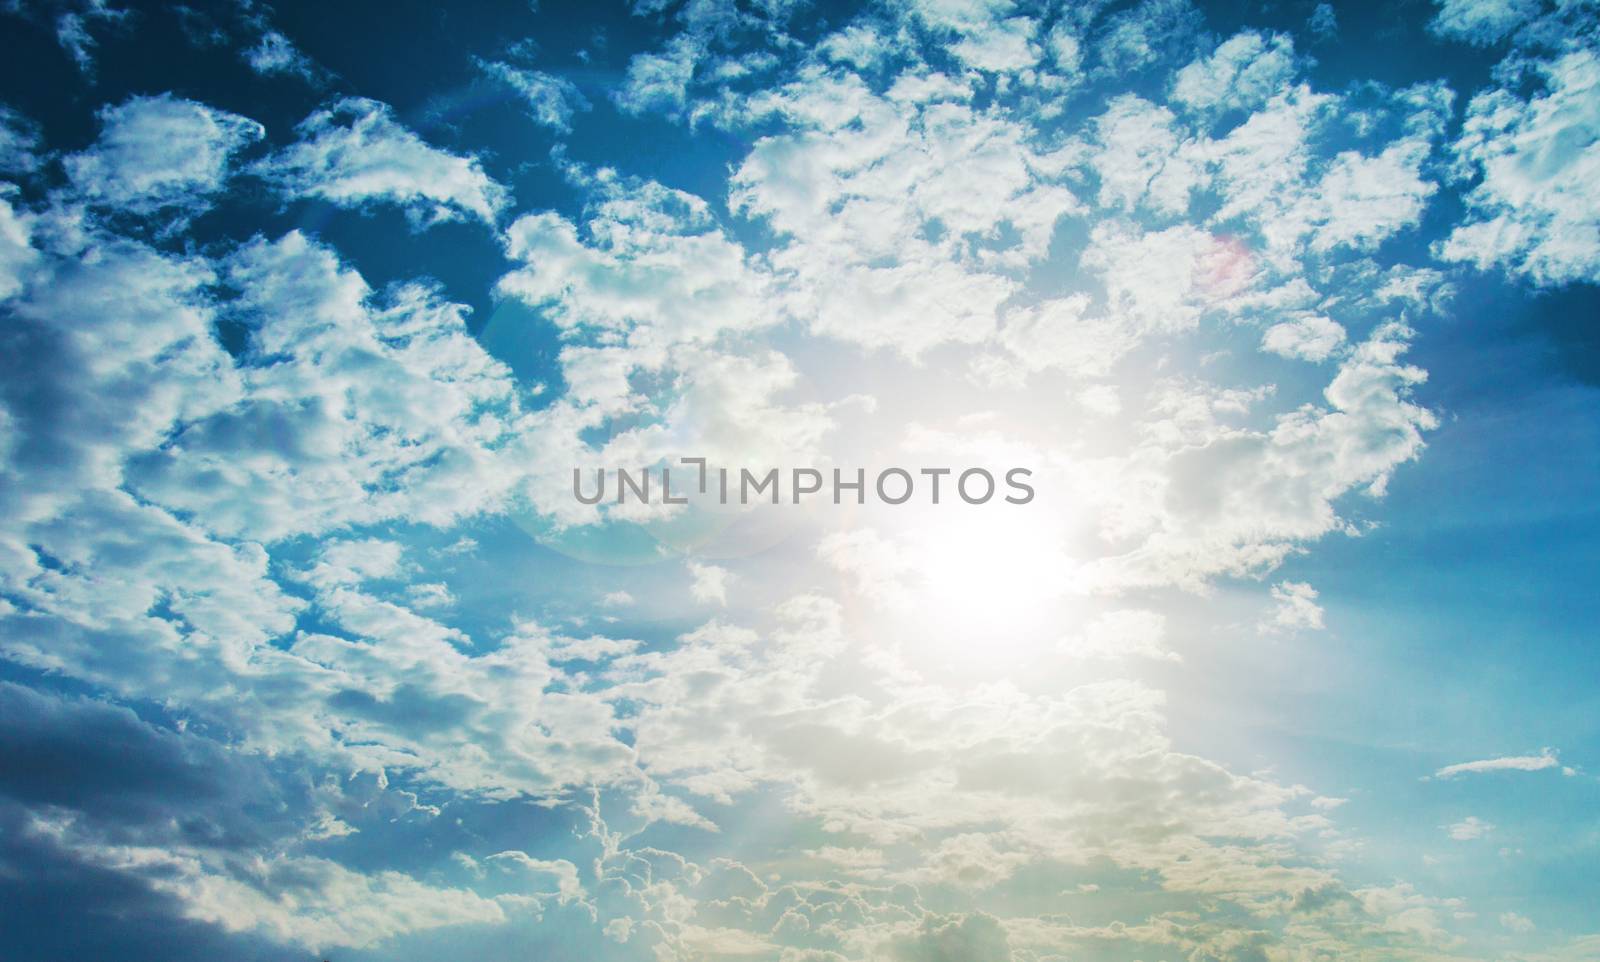 shining sun with lens flare. Blue sky with clouds background by yanukit